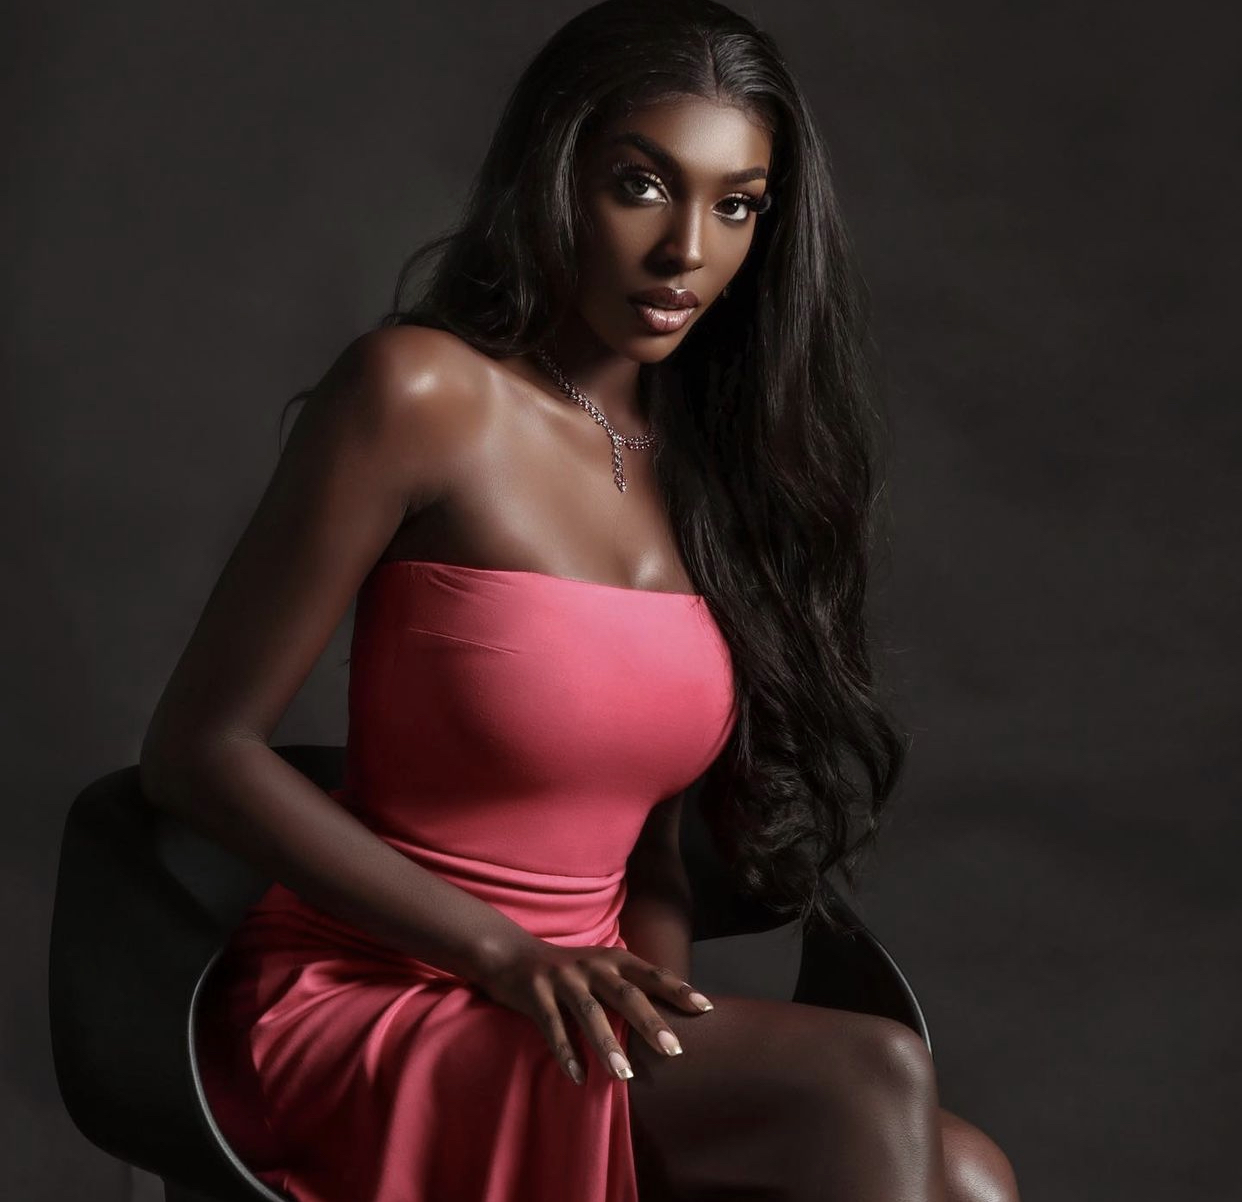 Take a look at 18 stunning photos of Olivia Yace, The Miss World 2nd Runner Up From Ivory Coast